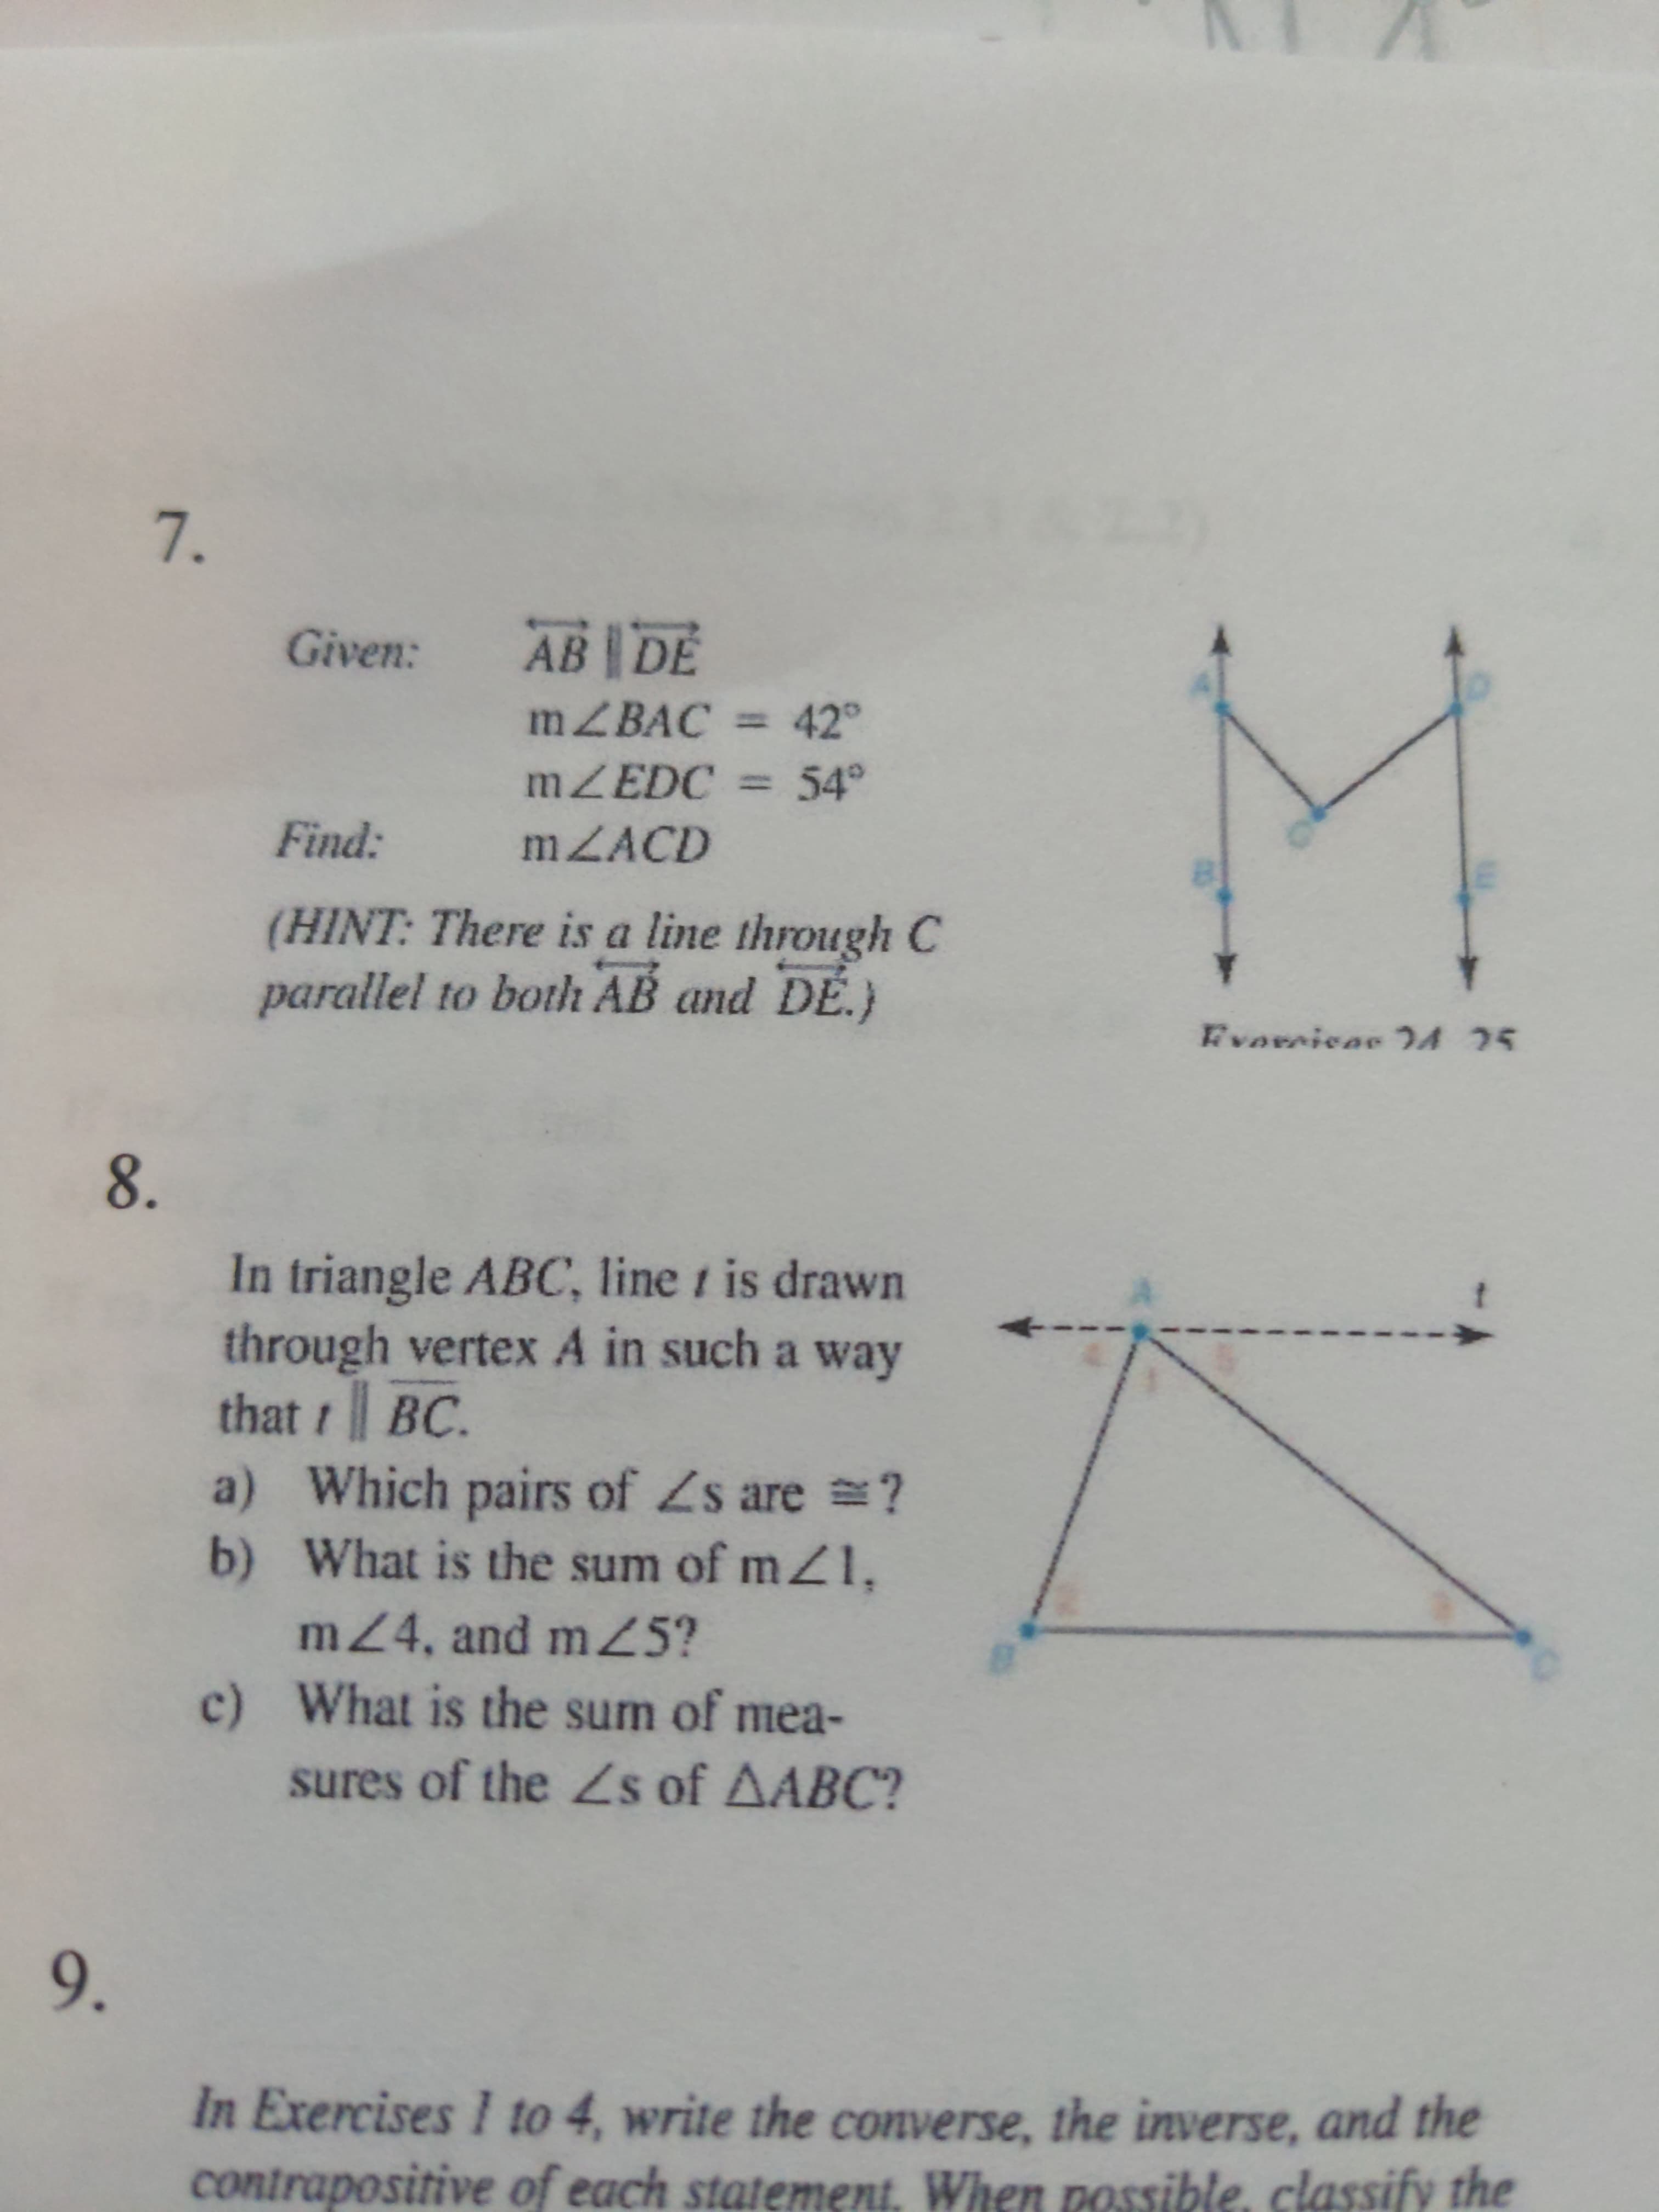 In triangle ABC, line t is drawn
through vertex A in such a way
that t BC.
a) Which pairs of Zs are =?
b) What is the sum of mI,
mZ4, and m25?
c) What is the sum of mea-
sures of the Zs of AABC?
